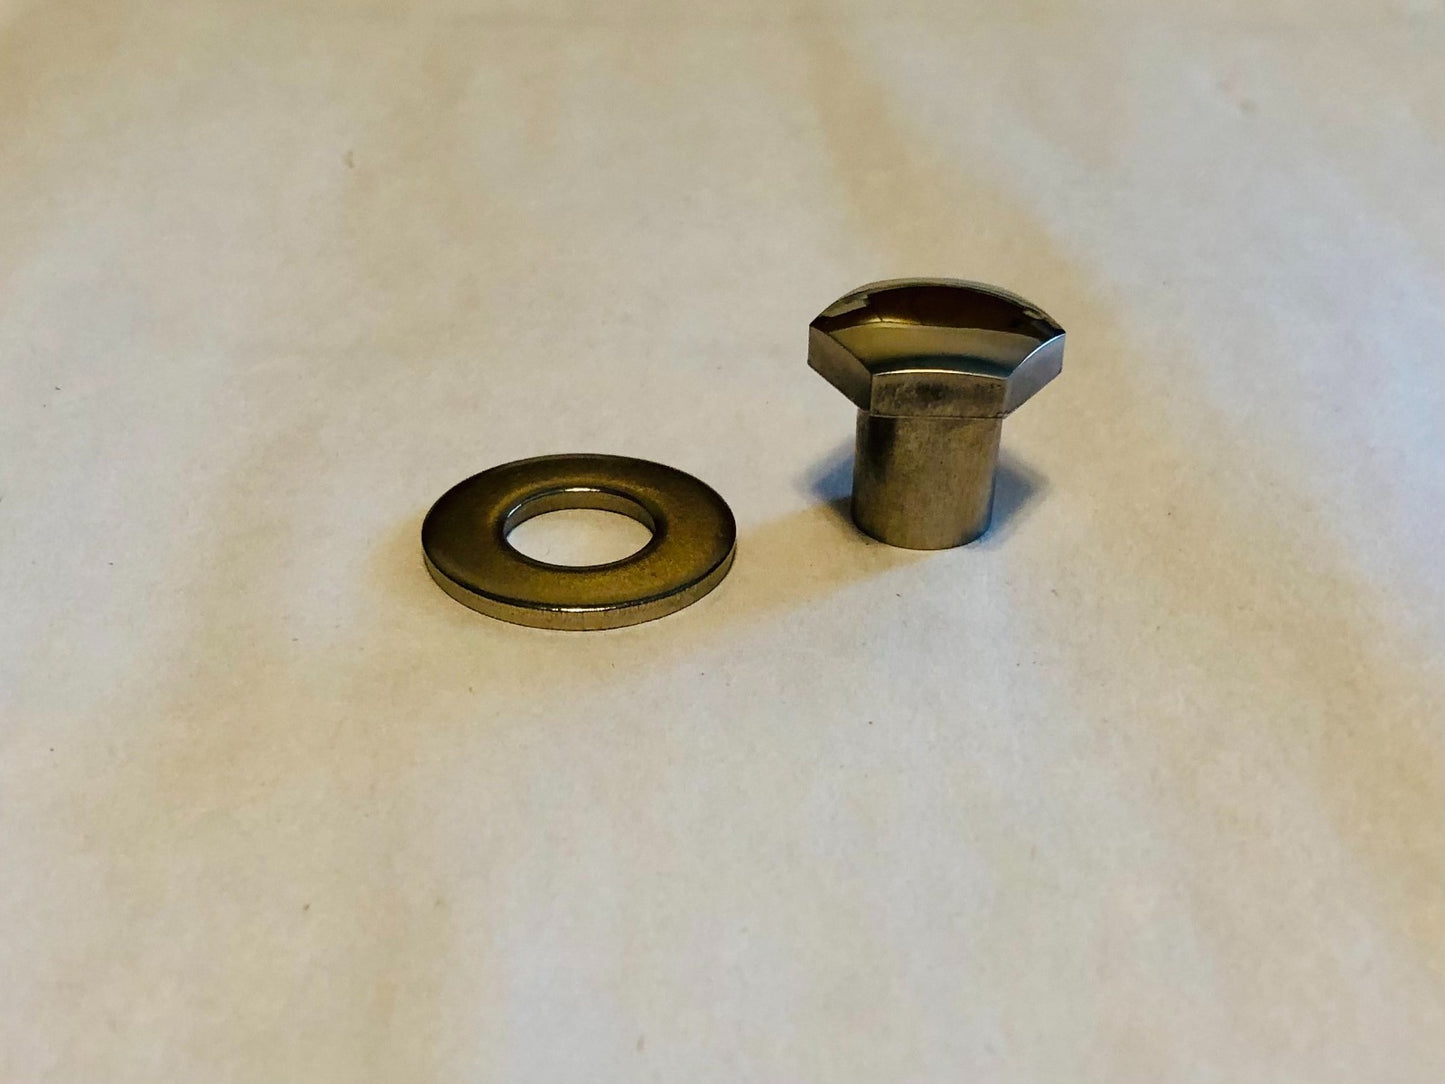 Primary Cover Nut and Washer Norton Chaincase